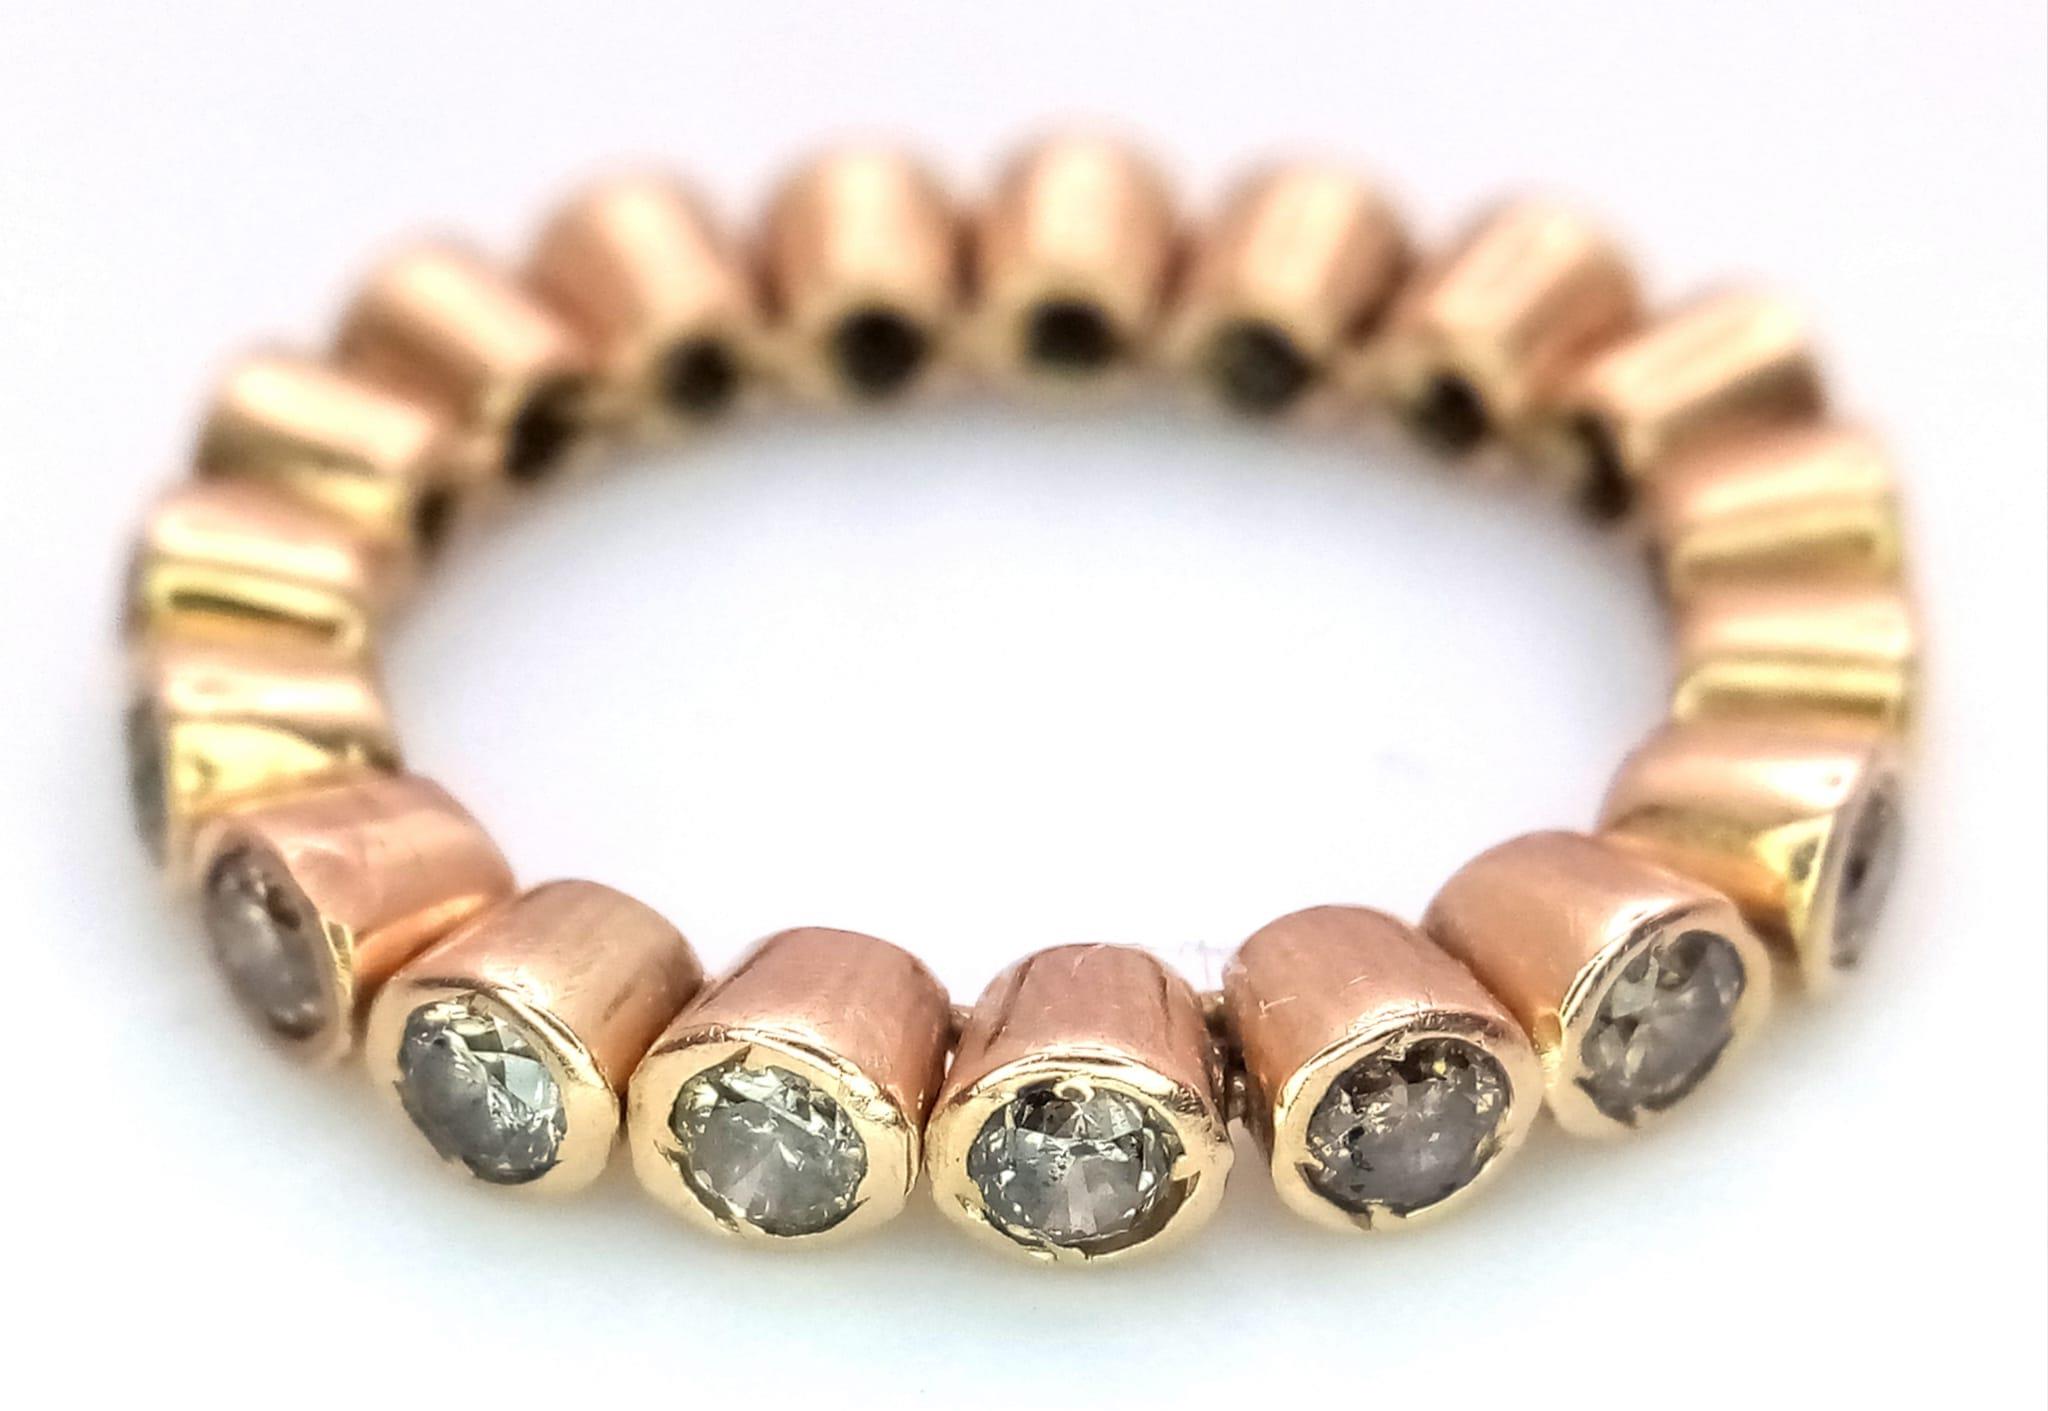 An 18K Rose Gold Articulated Diamond Half-Eternity Ring. Size Q. 5g total weight. Ref: 015884